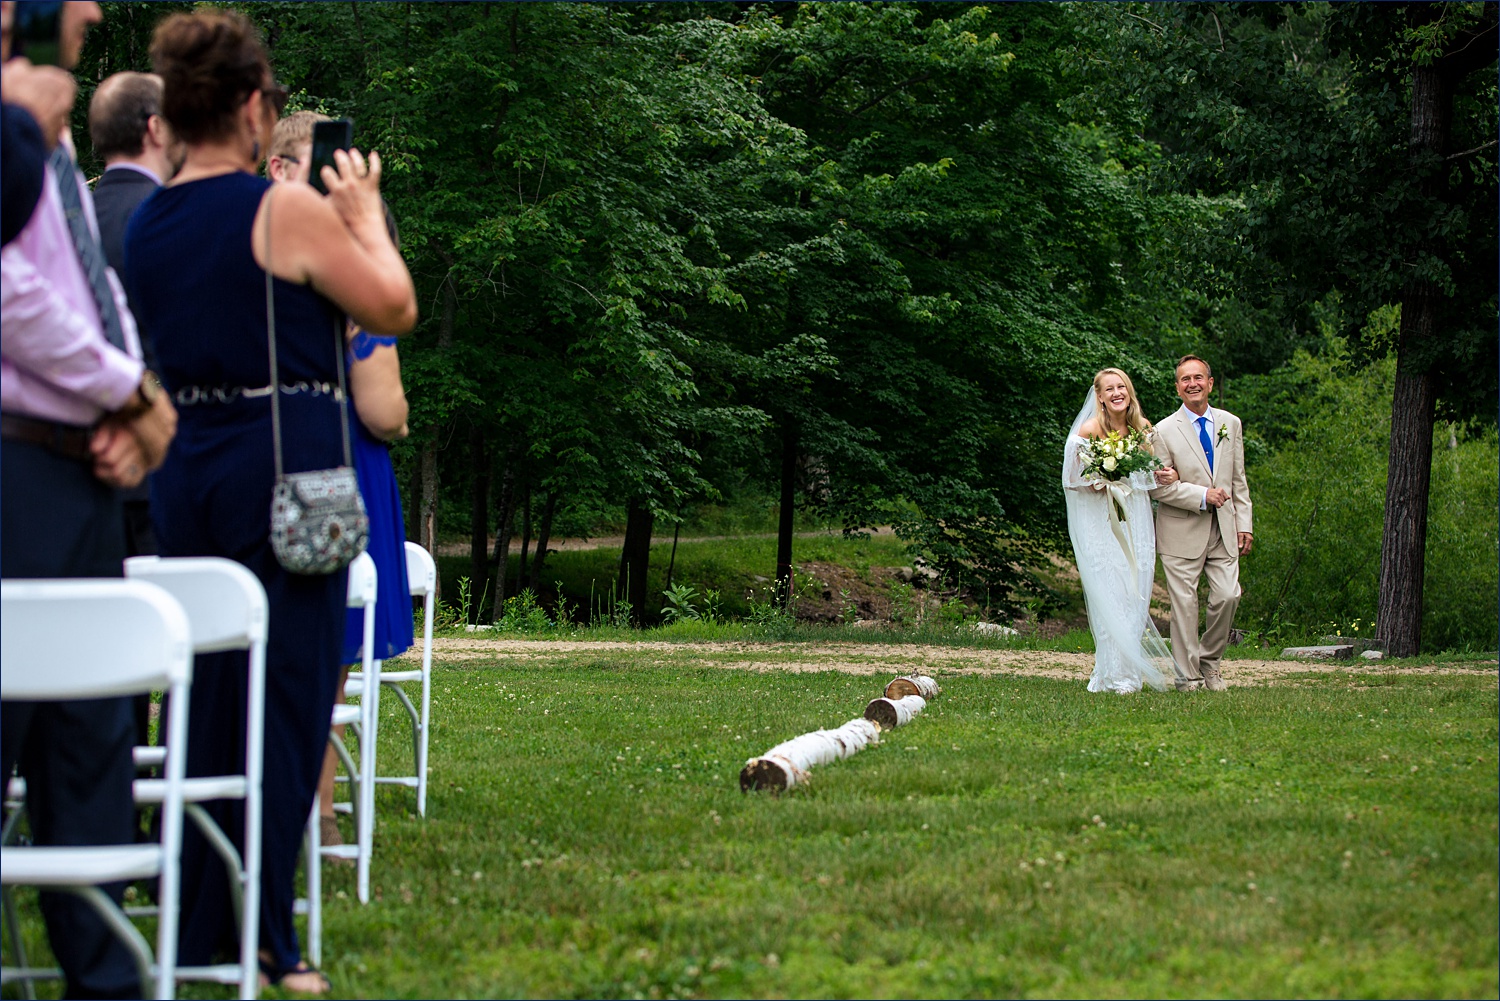 The bride and her father enter the wedding ceremony in wooded Windham NH